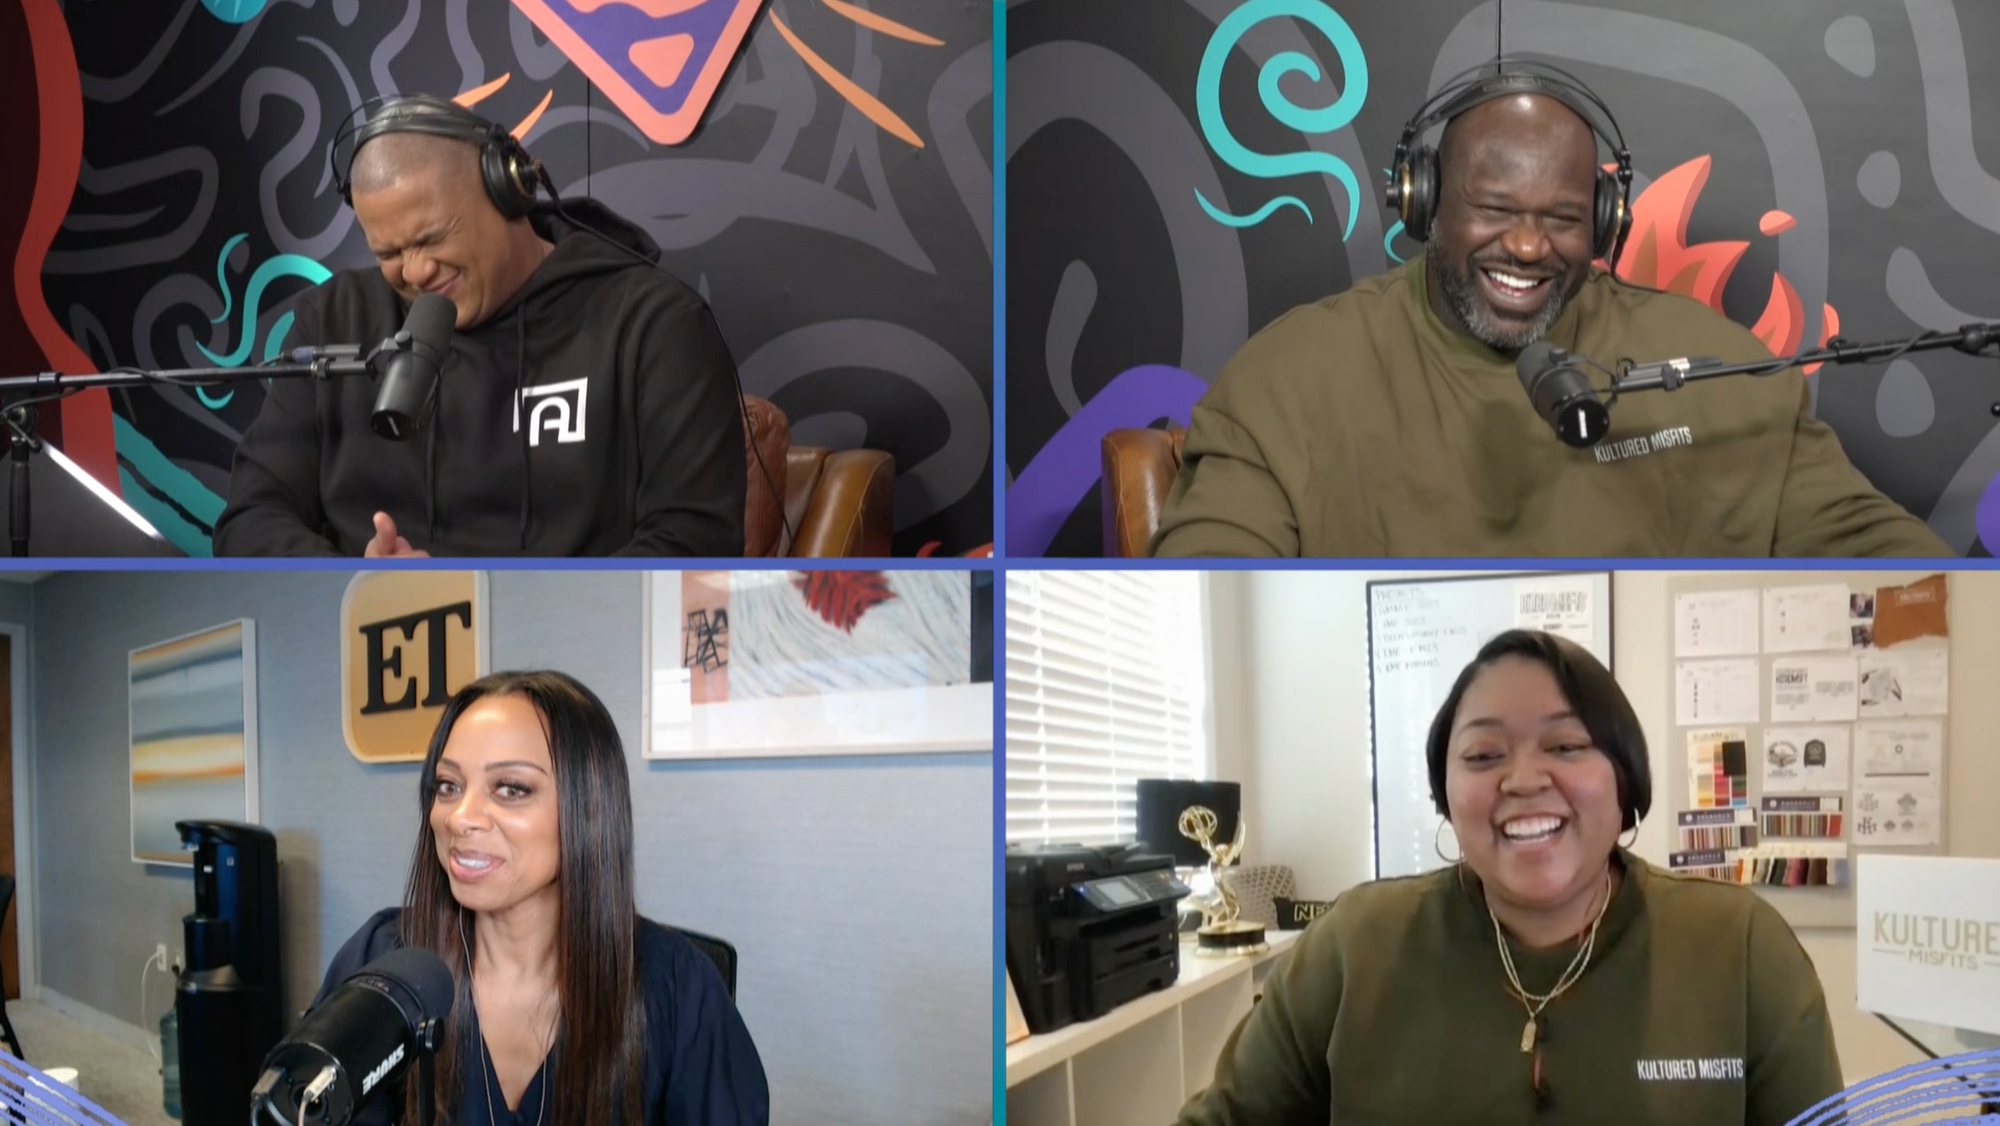 Kultured Misfits Chats With Shaq & The Big Podcast Crew